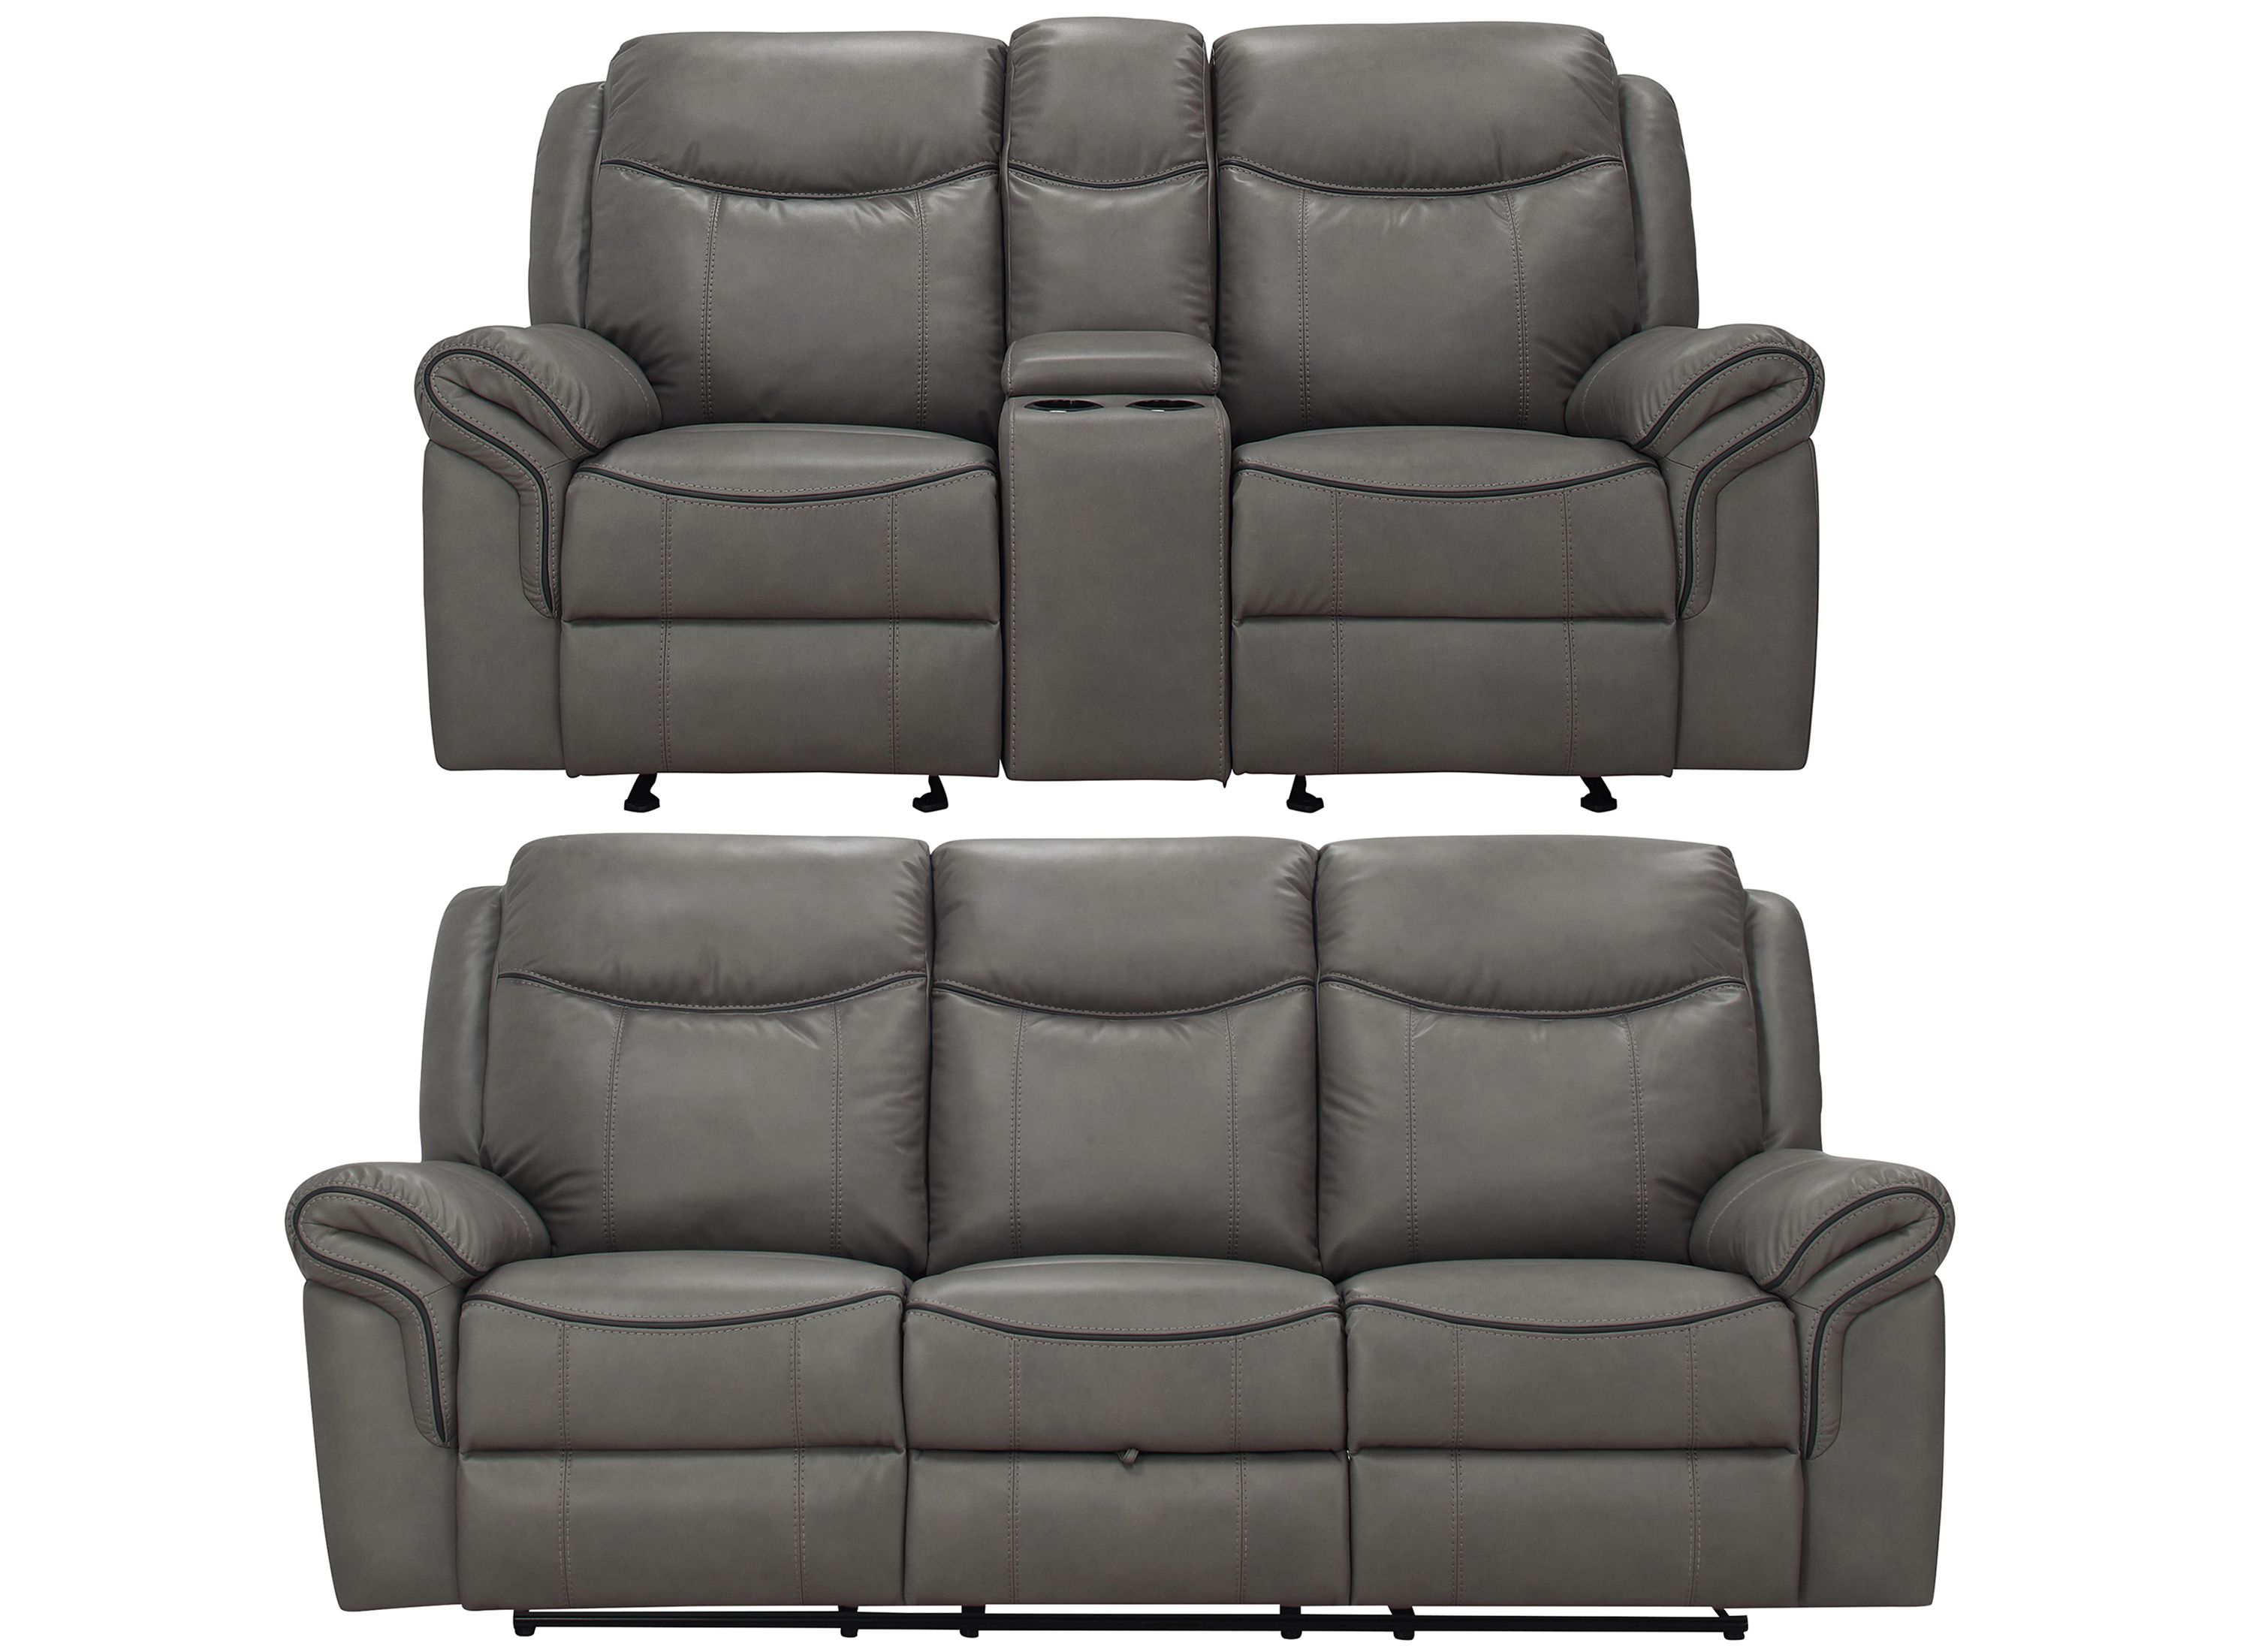 Ross 2-pc. Reclining Sofa and Loveseat Set